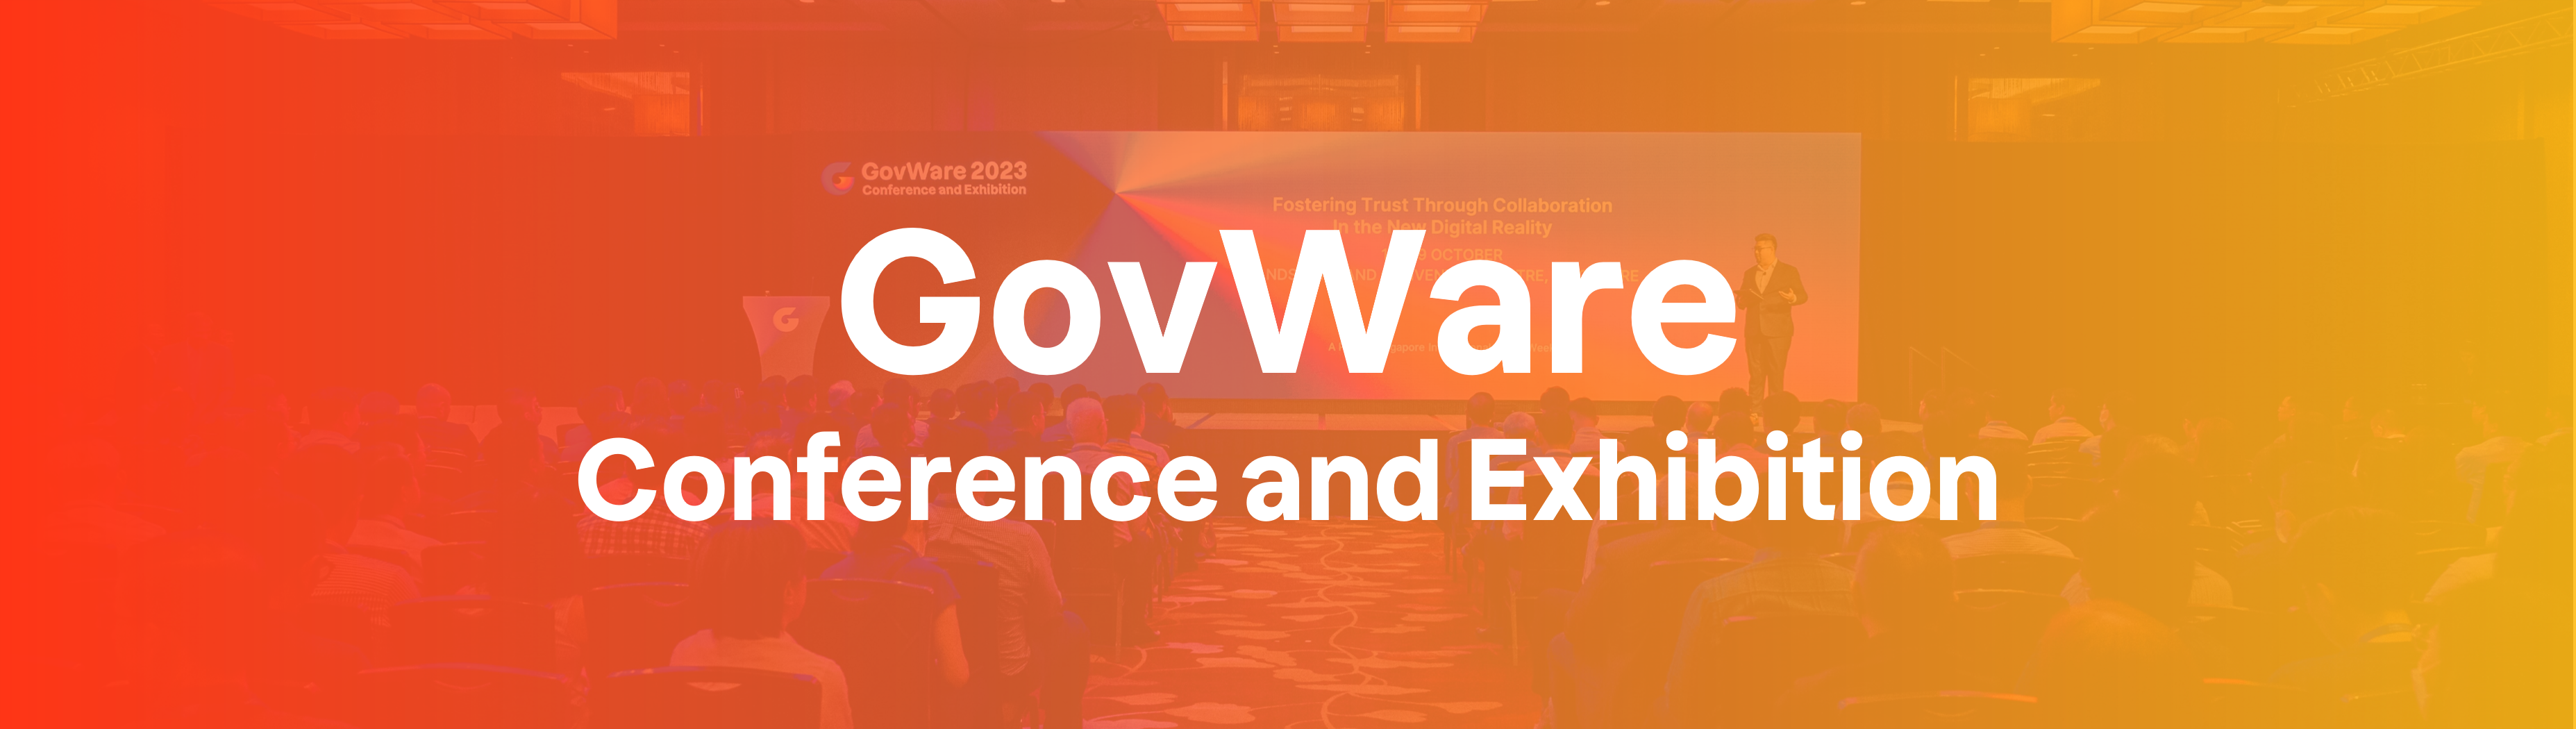 GovWare Conference and Exhibition